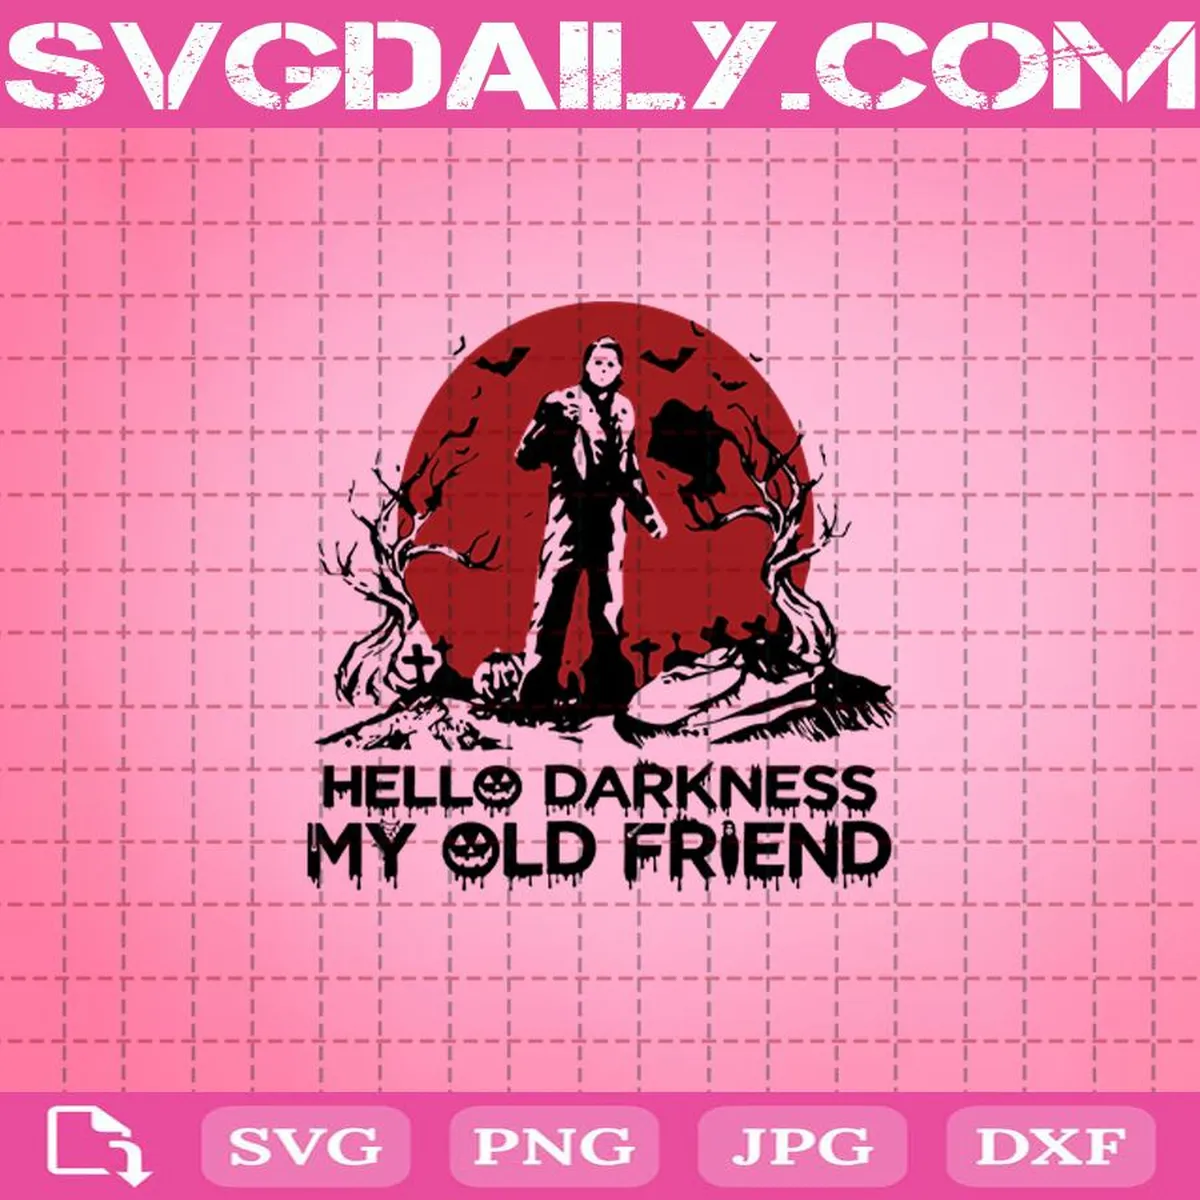 Hello Darkness My Old Friend Svg, Cricut Files, Clip Art, Instant Download, Digital Files, Svg, Png, Eps, Dxf